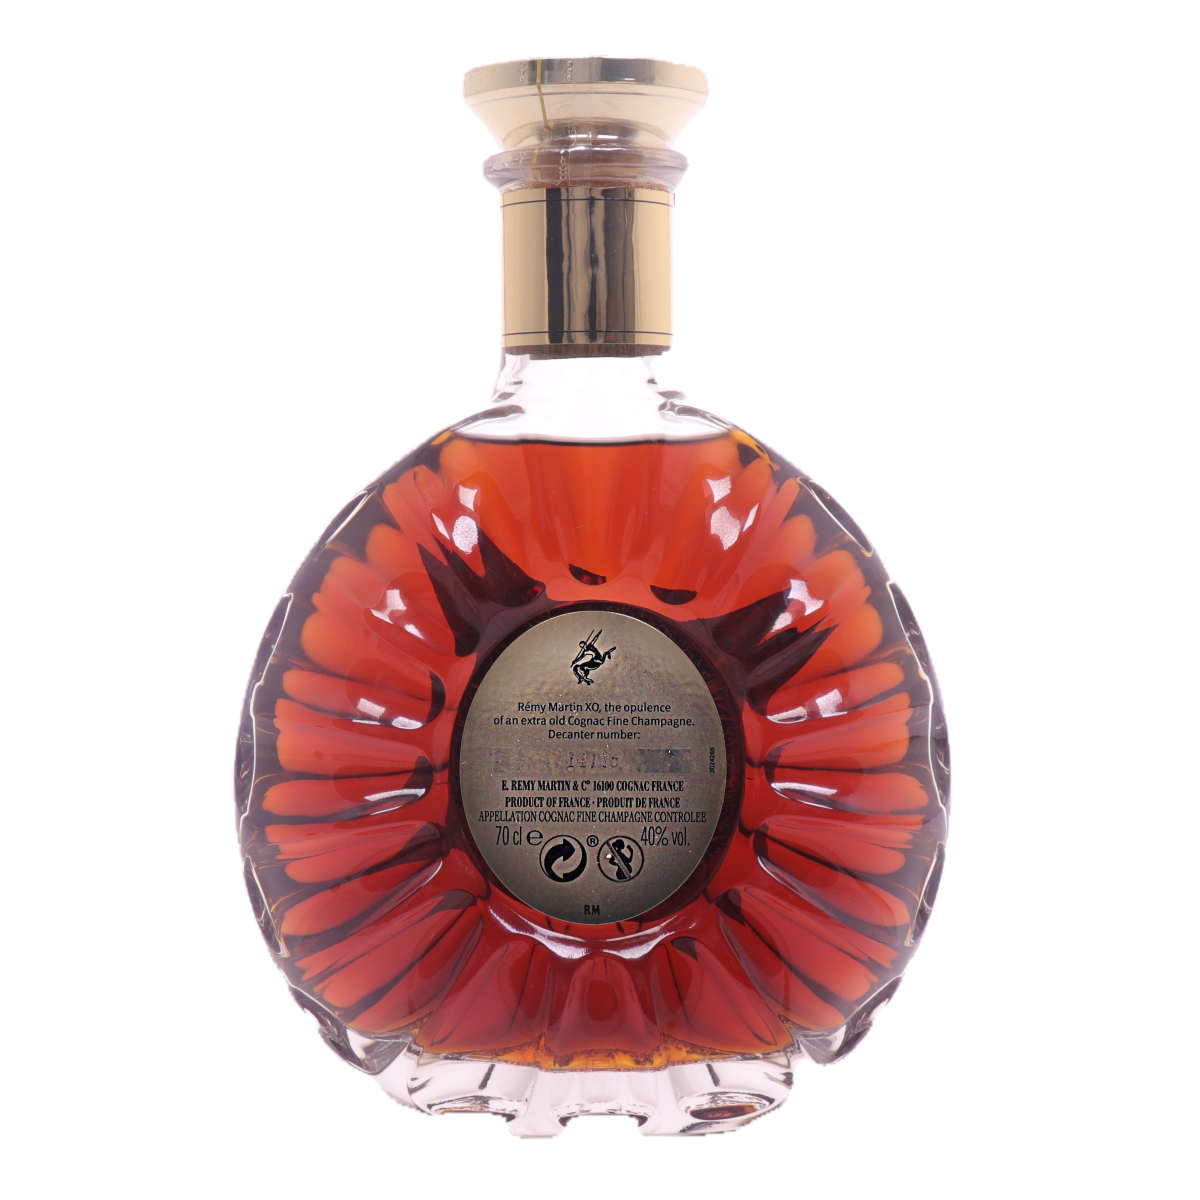 Remy Martin Cognac XO Atelier Thiery Limited Edition